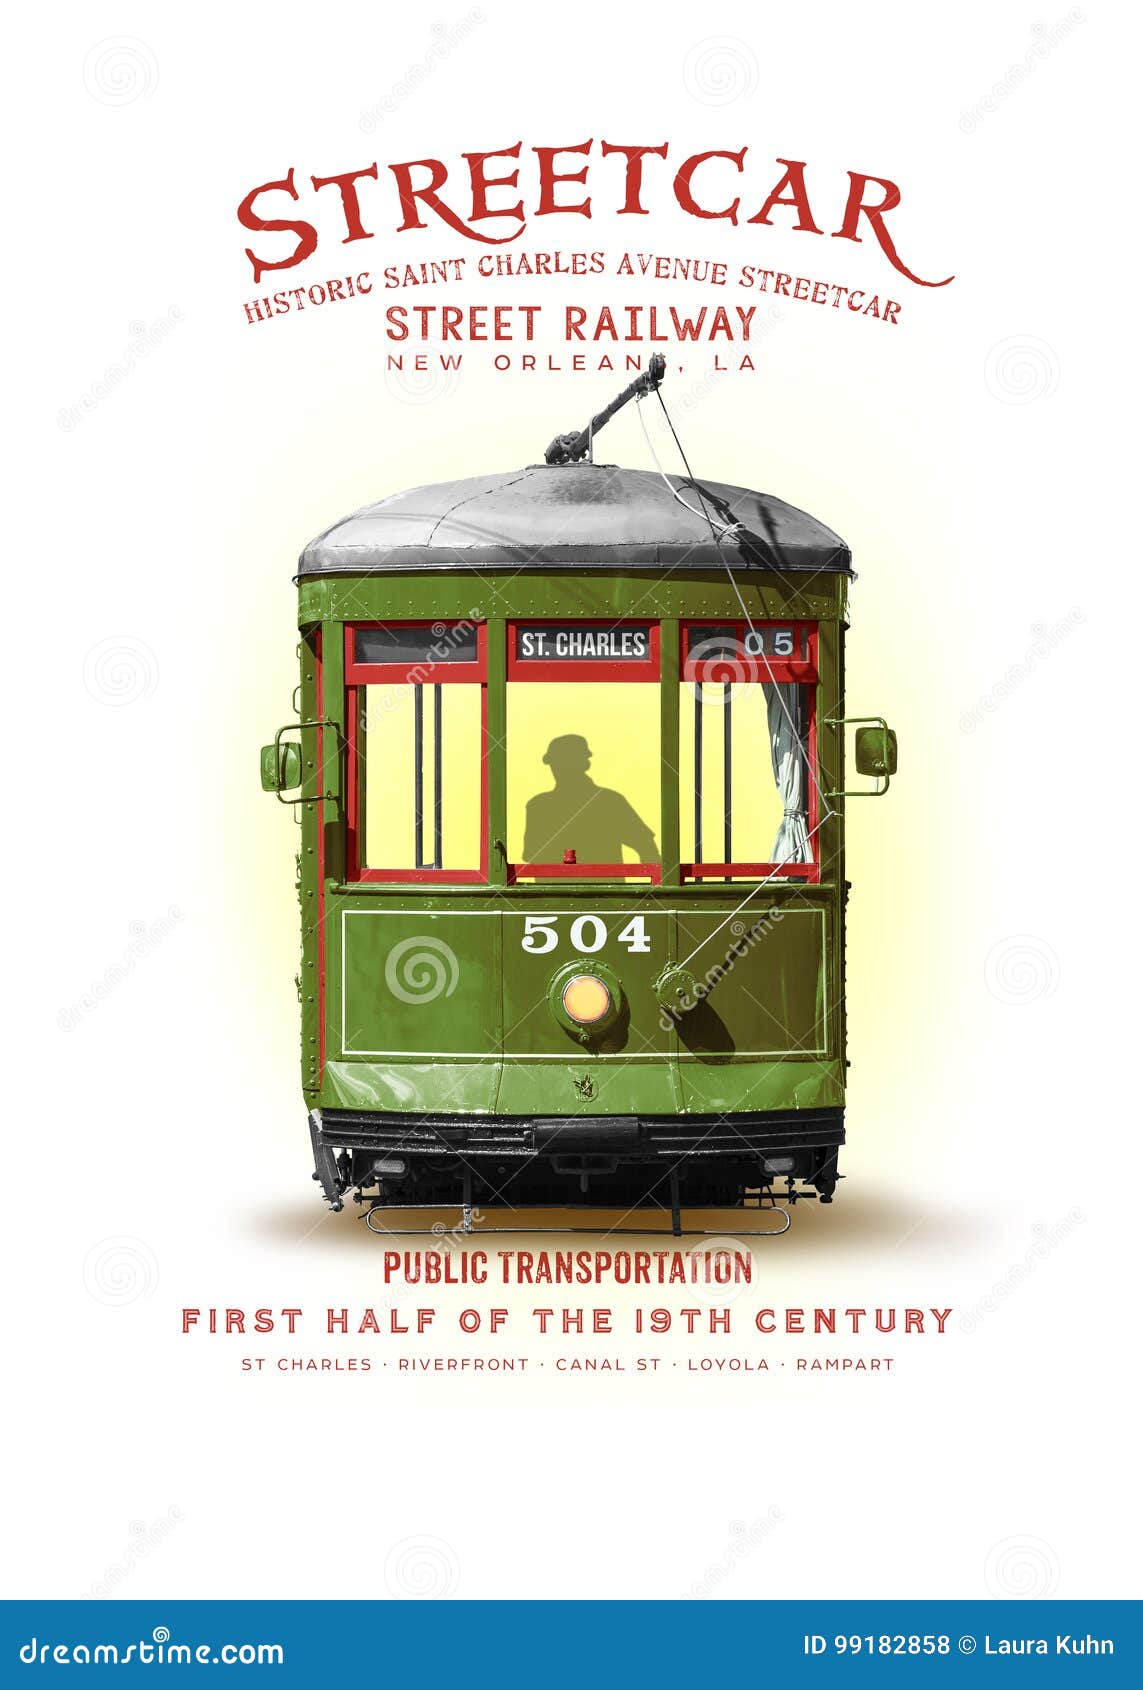 new orleans culture collection streetcar